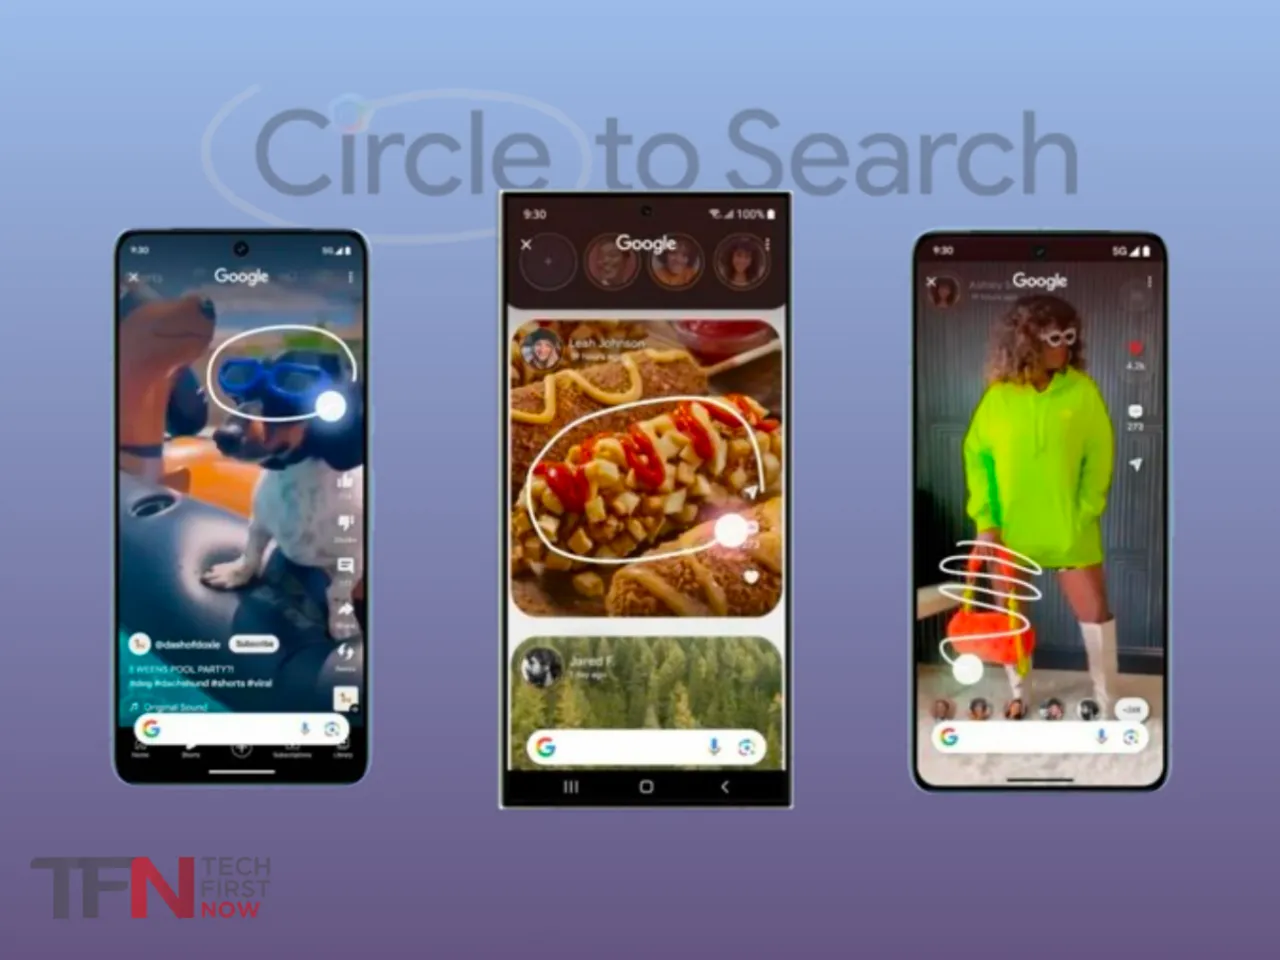 How to Use Google's Circle to Search Feature on Android